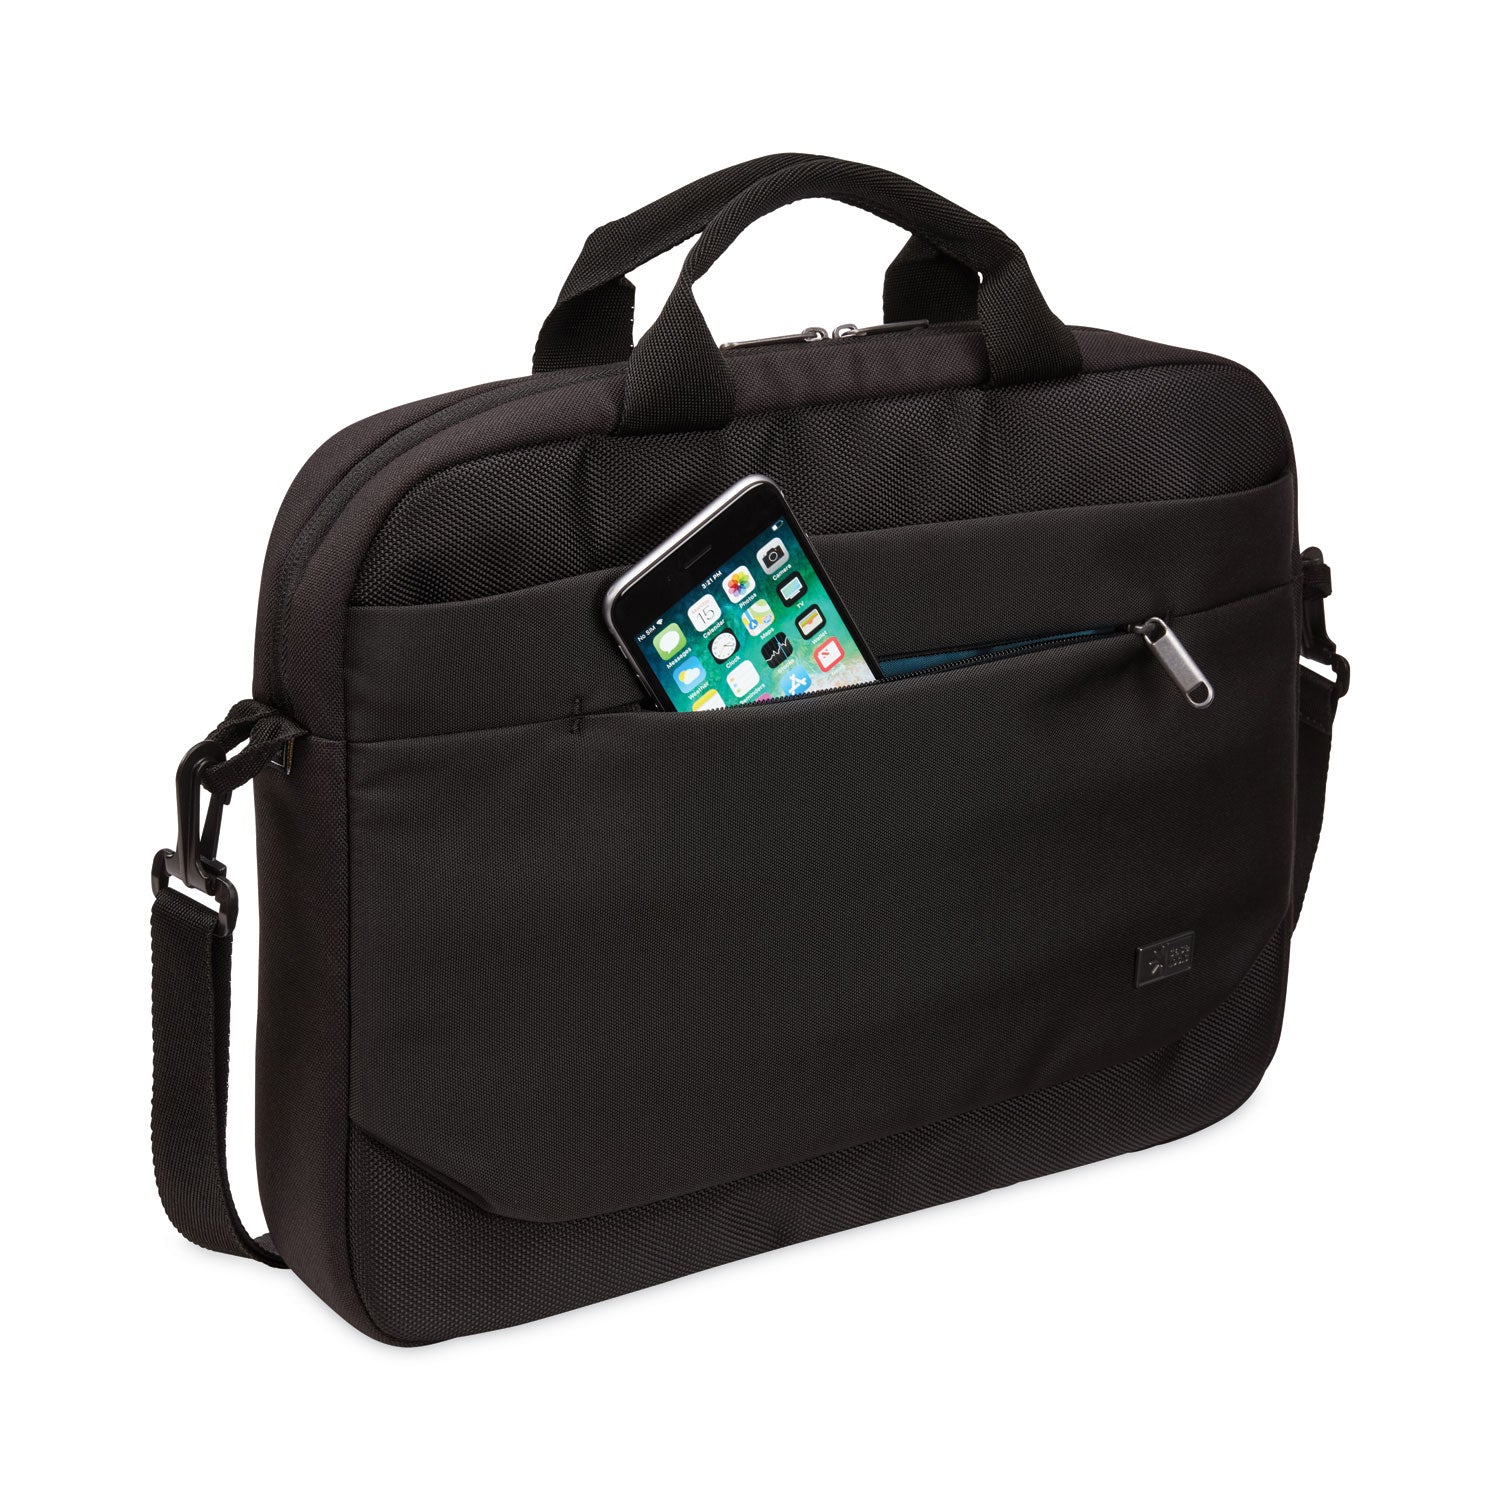 advantage-laptop-attache-fits-devices-up-to-14-polyester-146-x-28-x-13-black_clg3203986 - 5